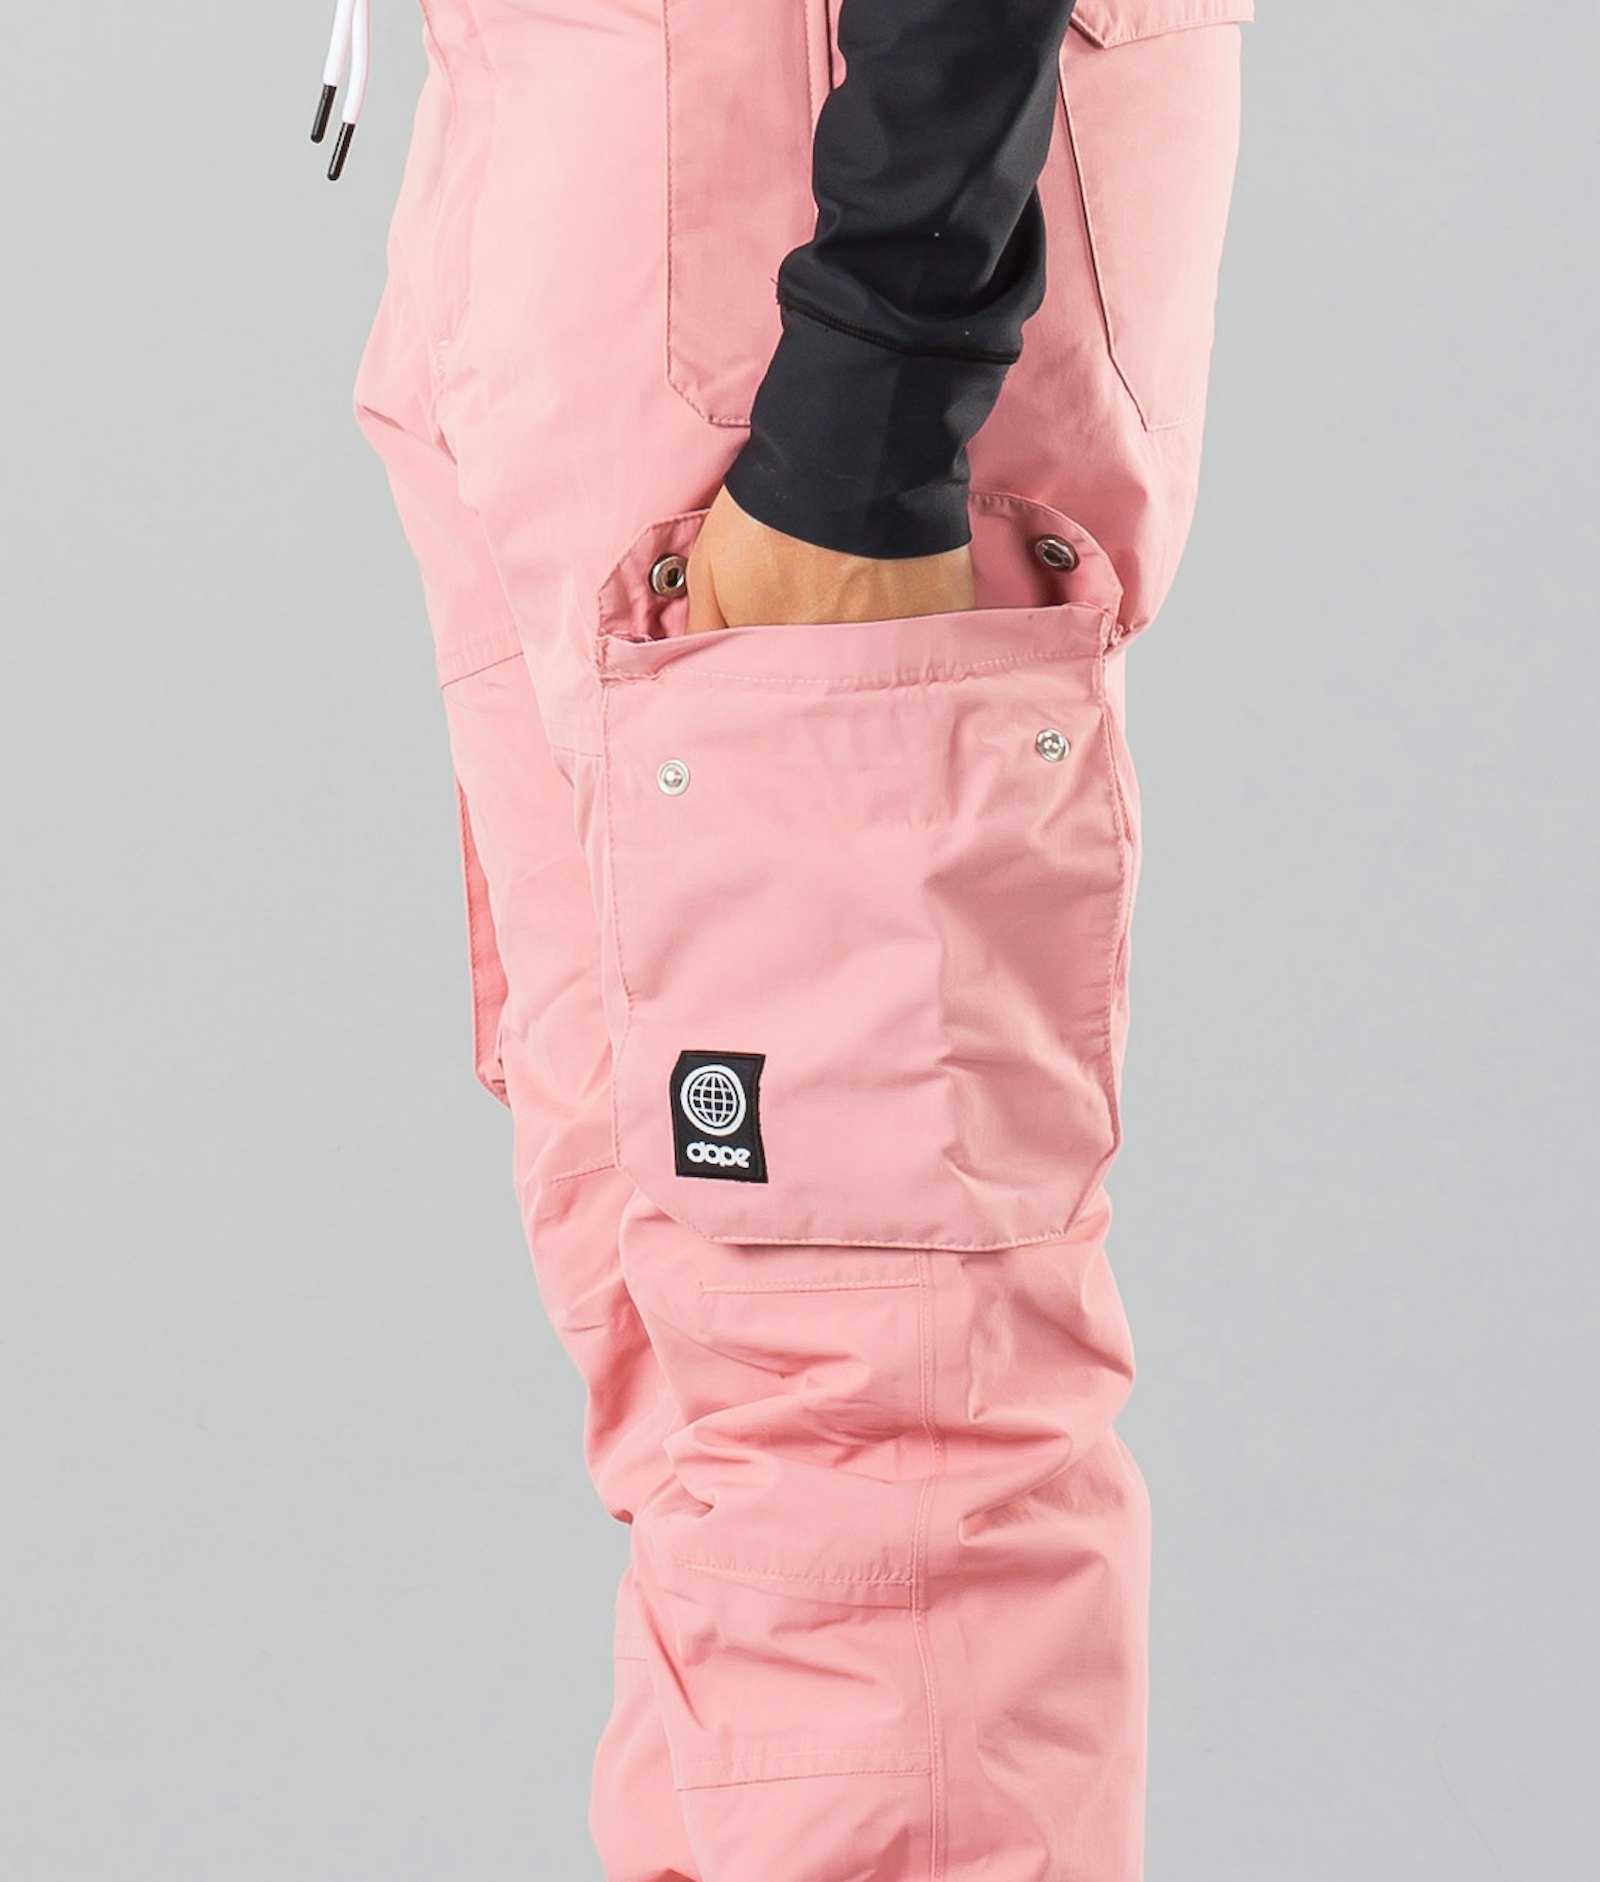 Iconic W 2018 Snowboard Pants Women Pink, Image 8 of 10